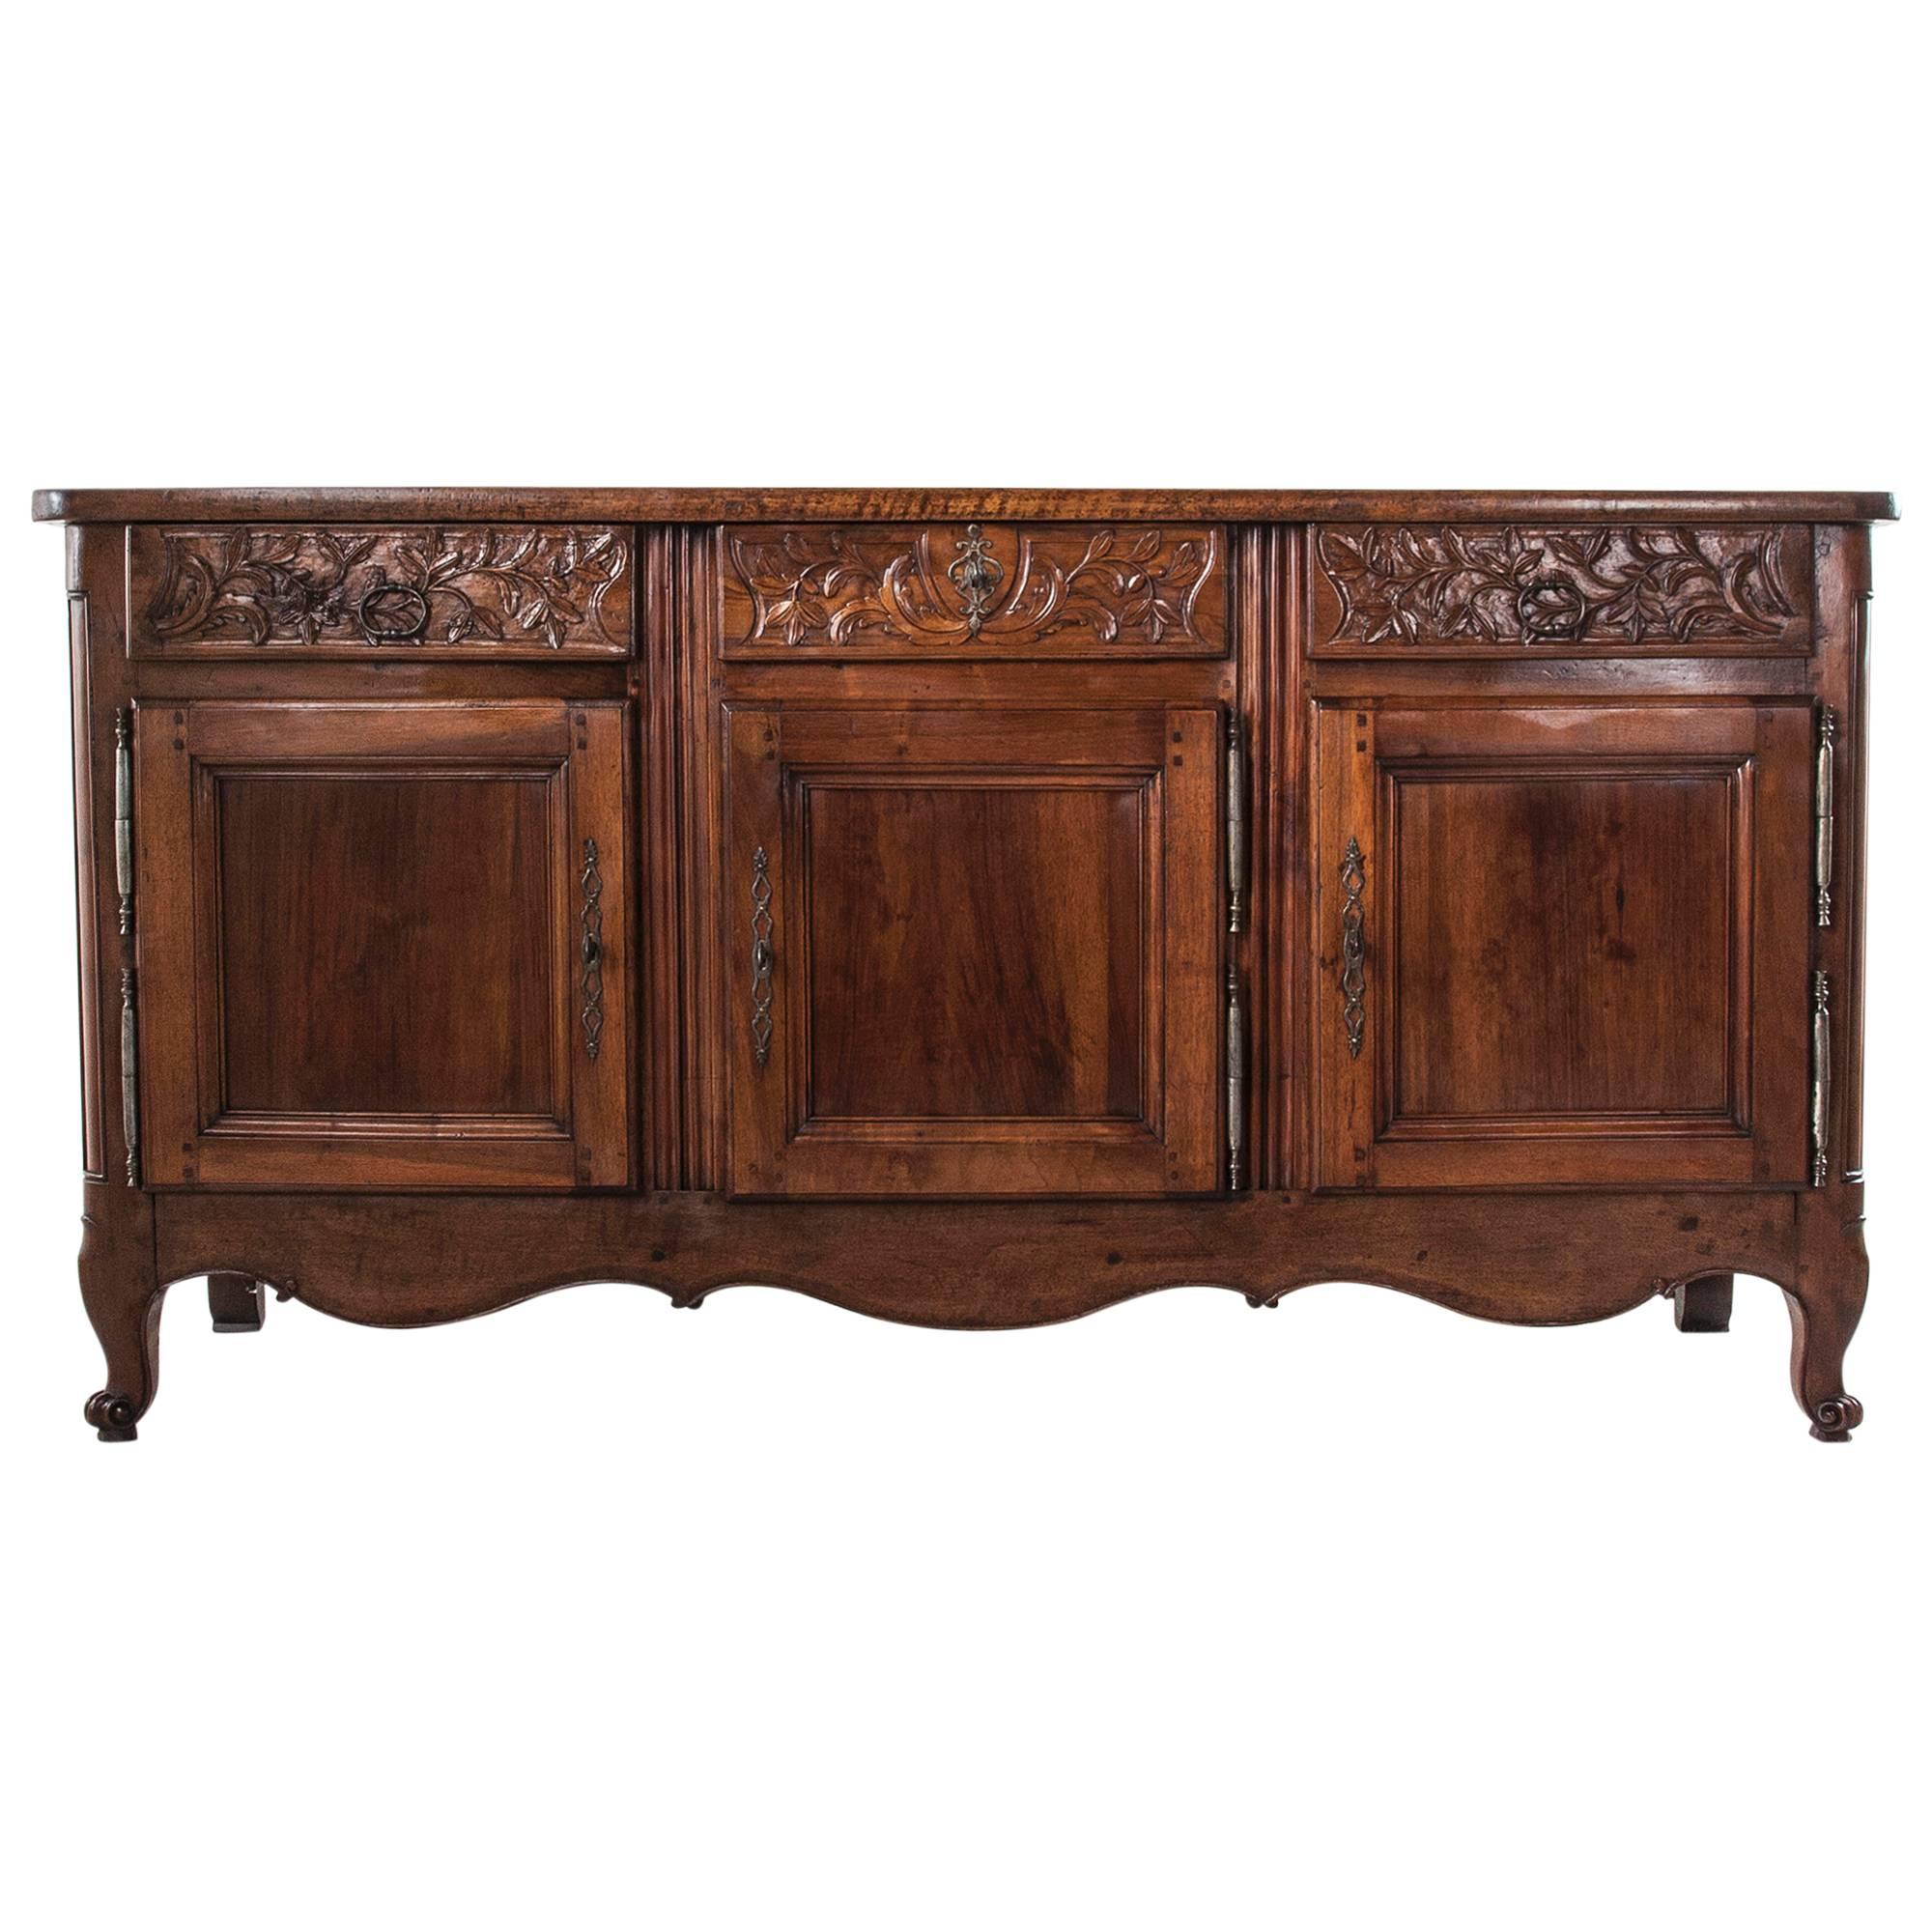 18th Century Buffet of Exceptional Thick Hand-Carved Solid Walnut